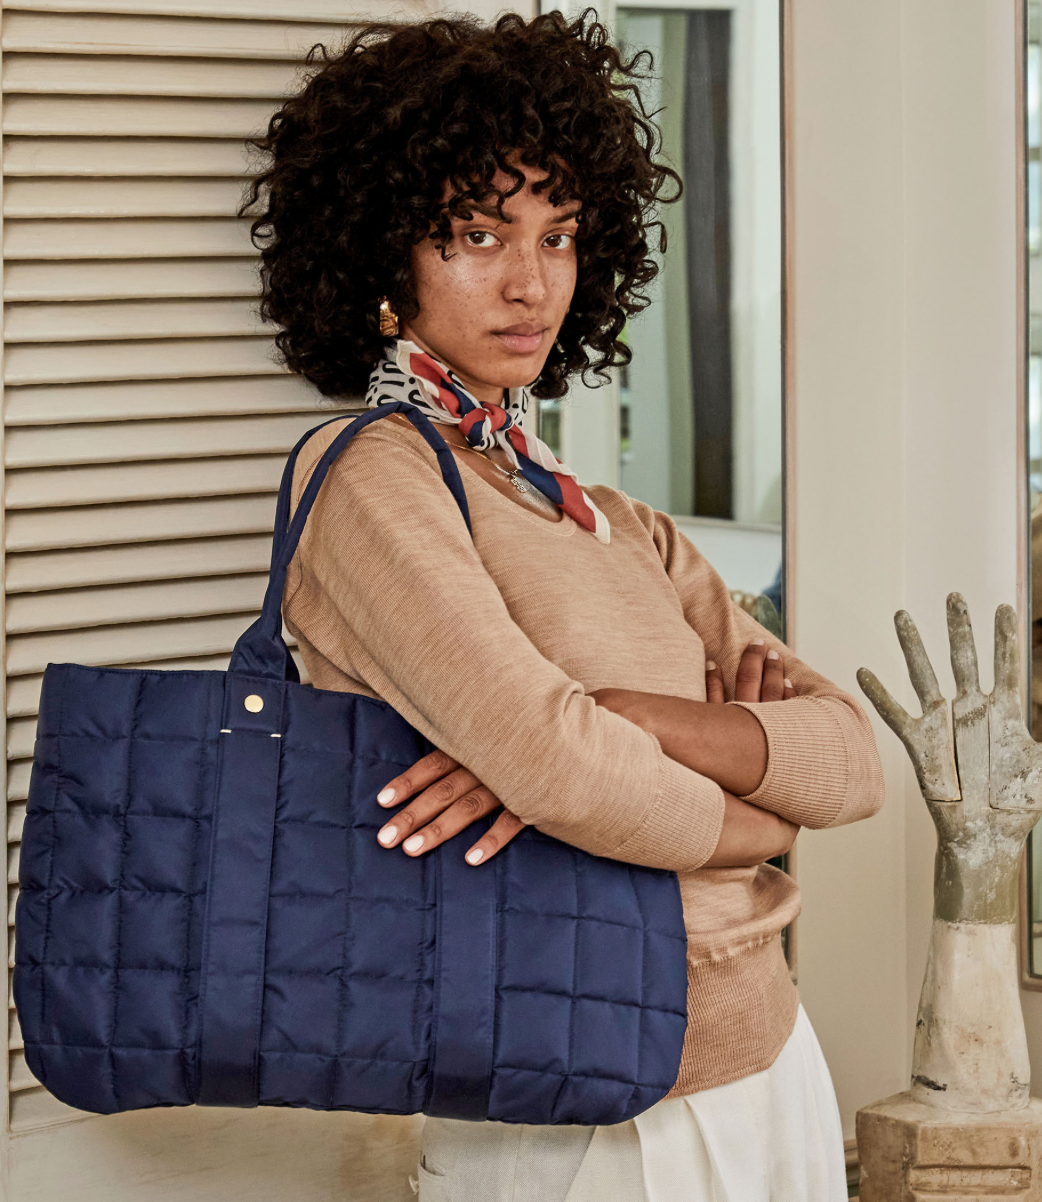 Clare V. Quilted Tote Bags for Women